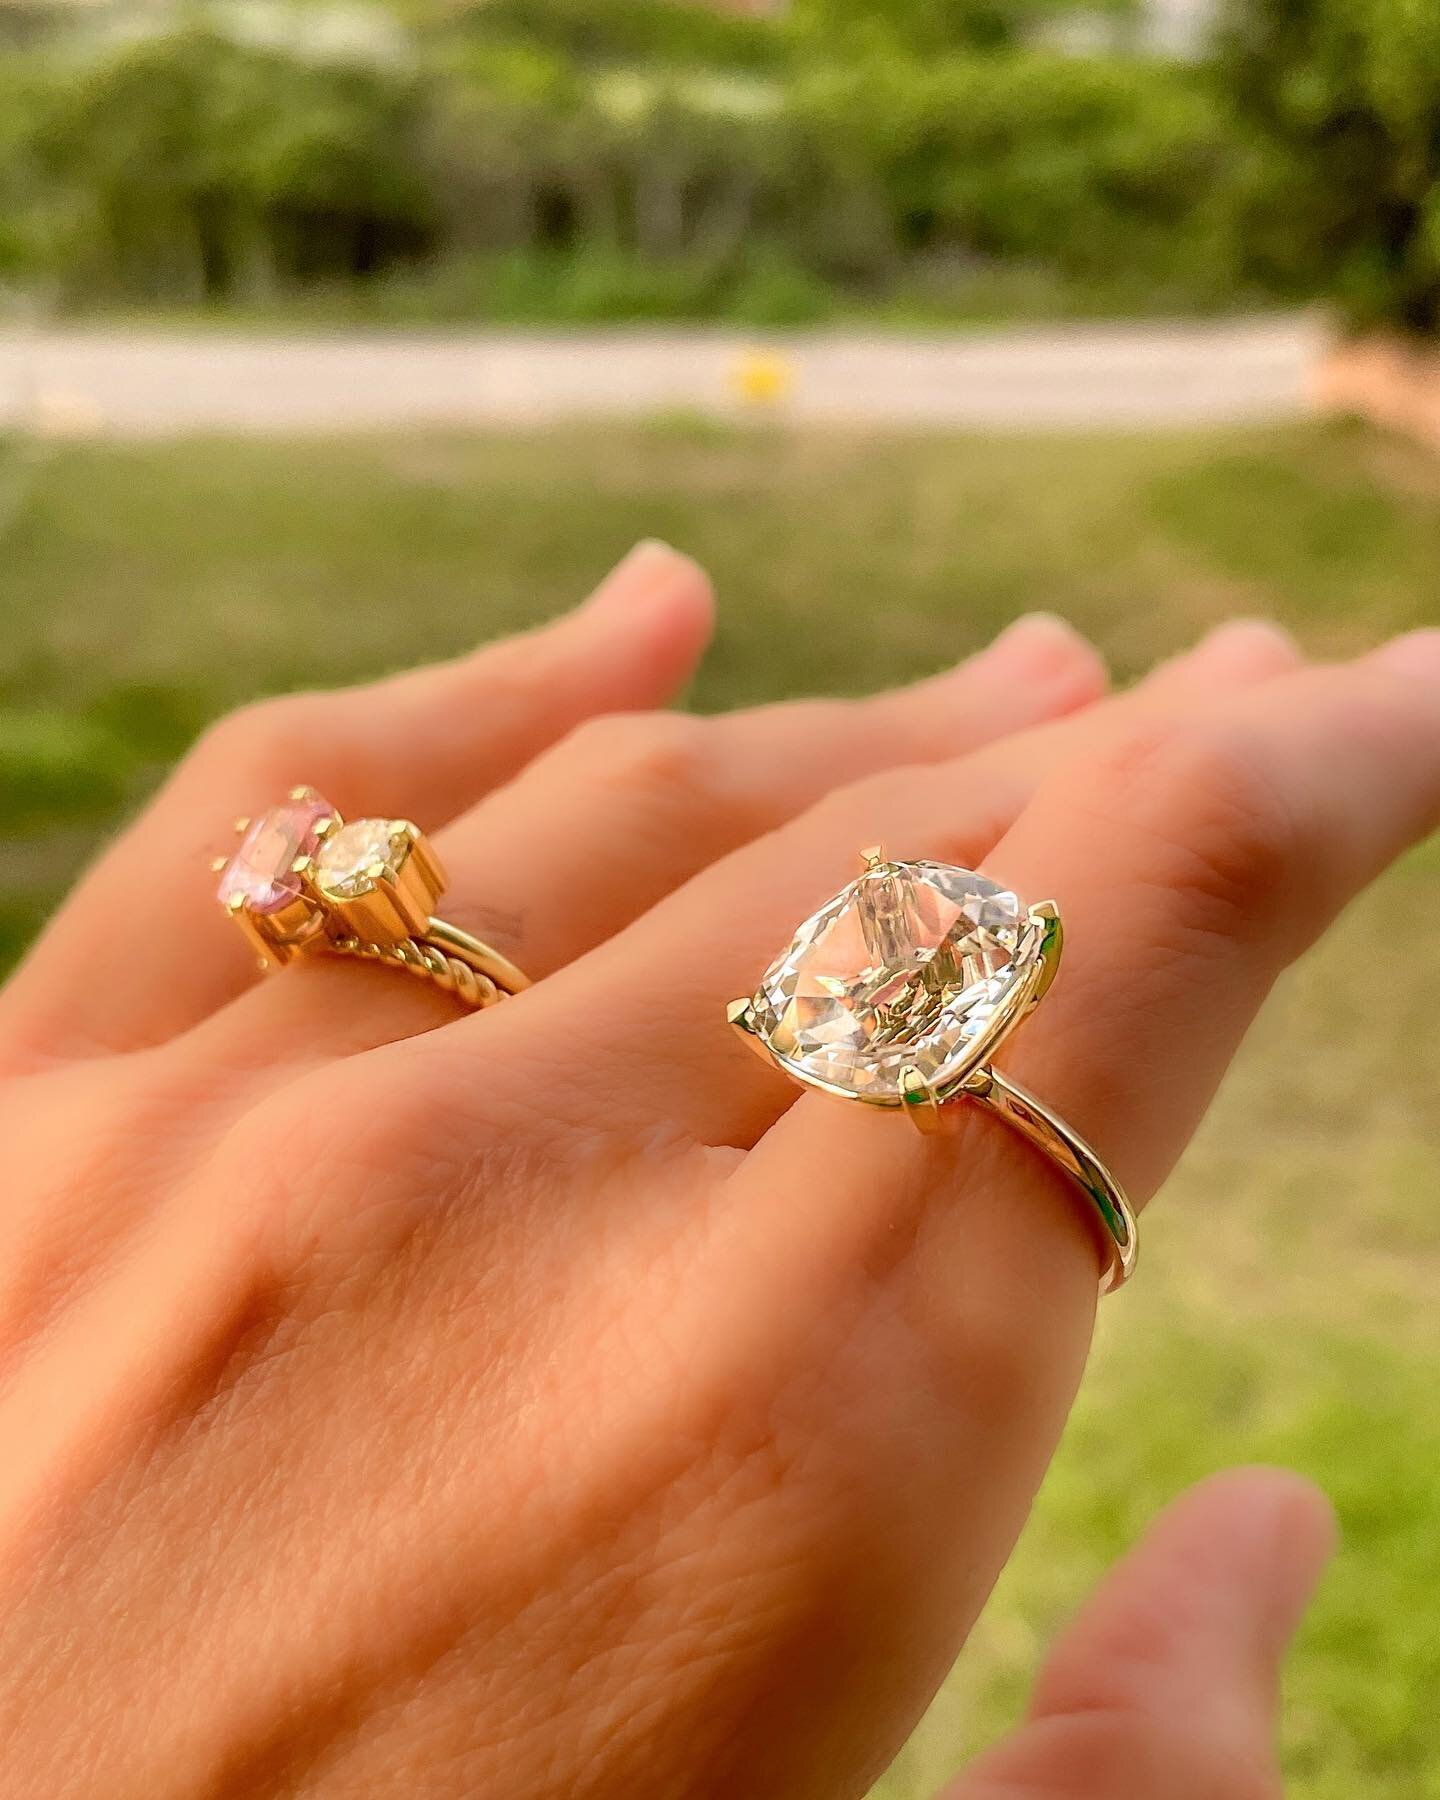 Introducing the
A S H L E Y  P R O M I S E  R I N G

The most beautifully cut natural superior quality crystals set in hand made gold rings with our signature round bevel shank and square claws. 

#idaelsje_promise_ring
#idaelsje_finejewellery 
#hand